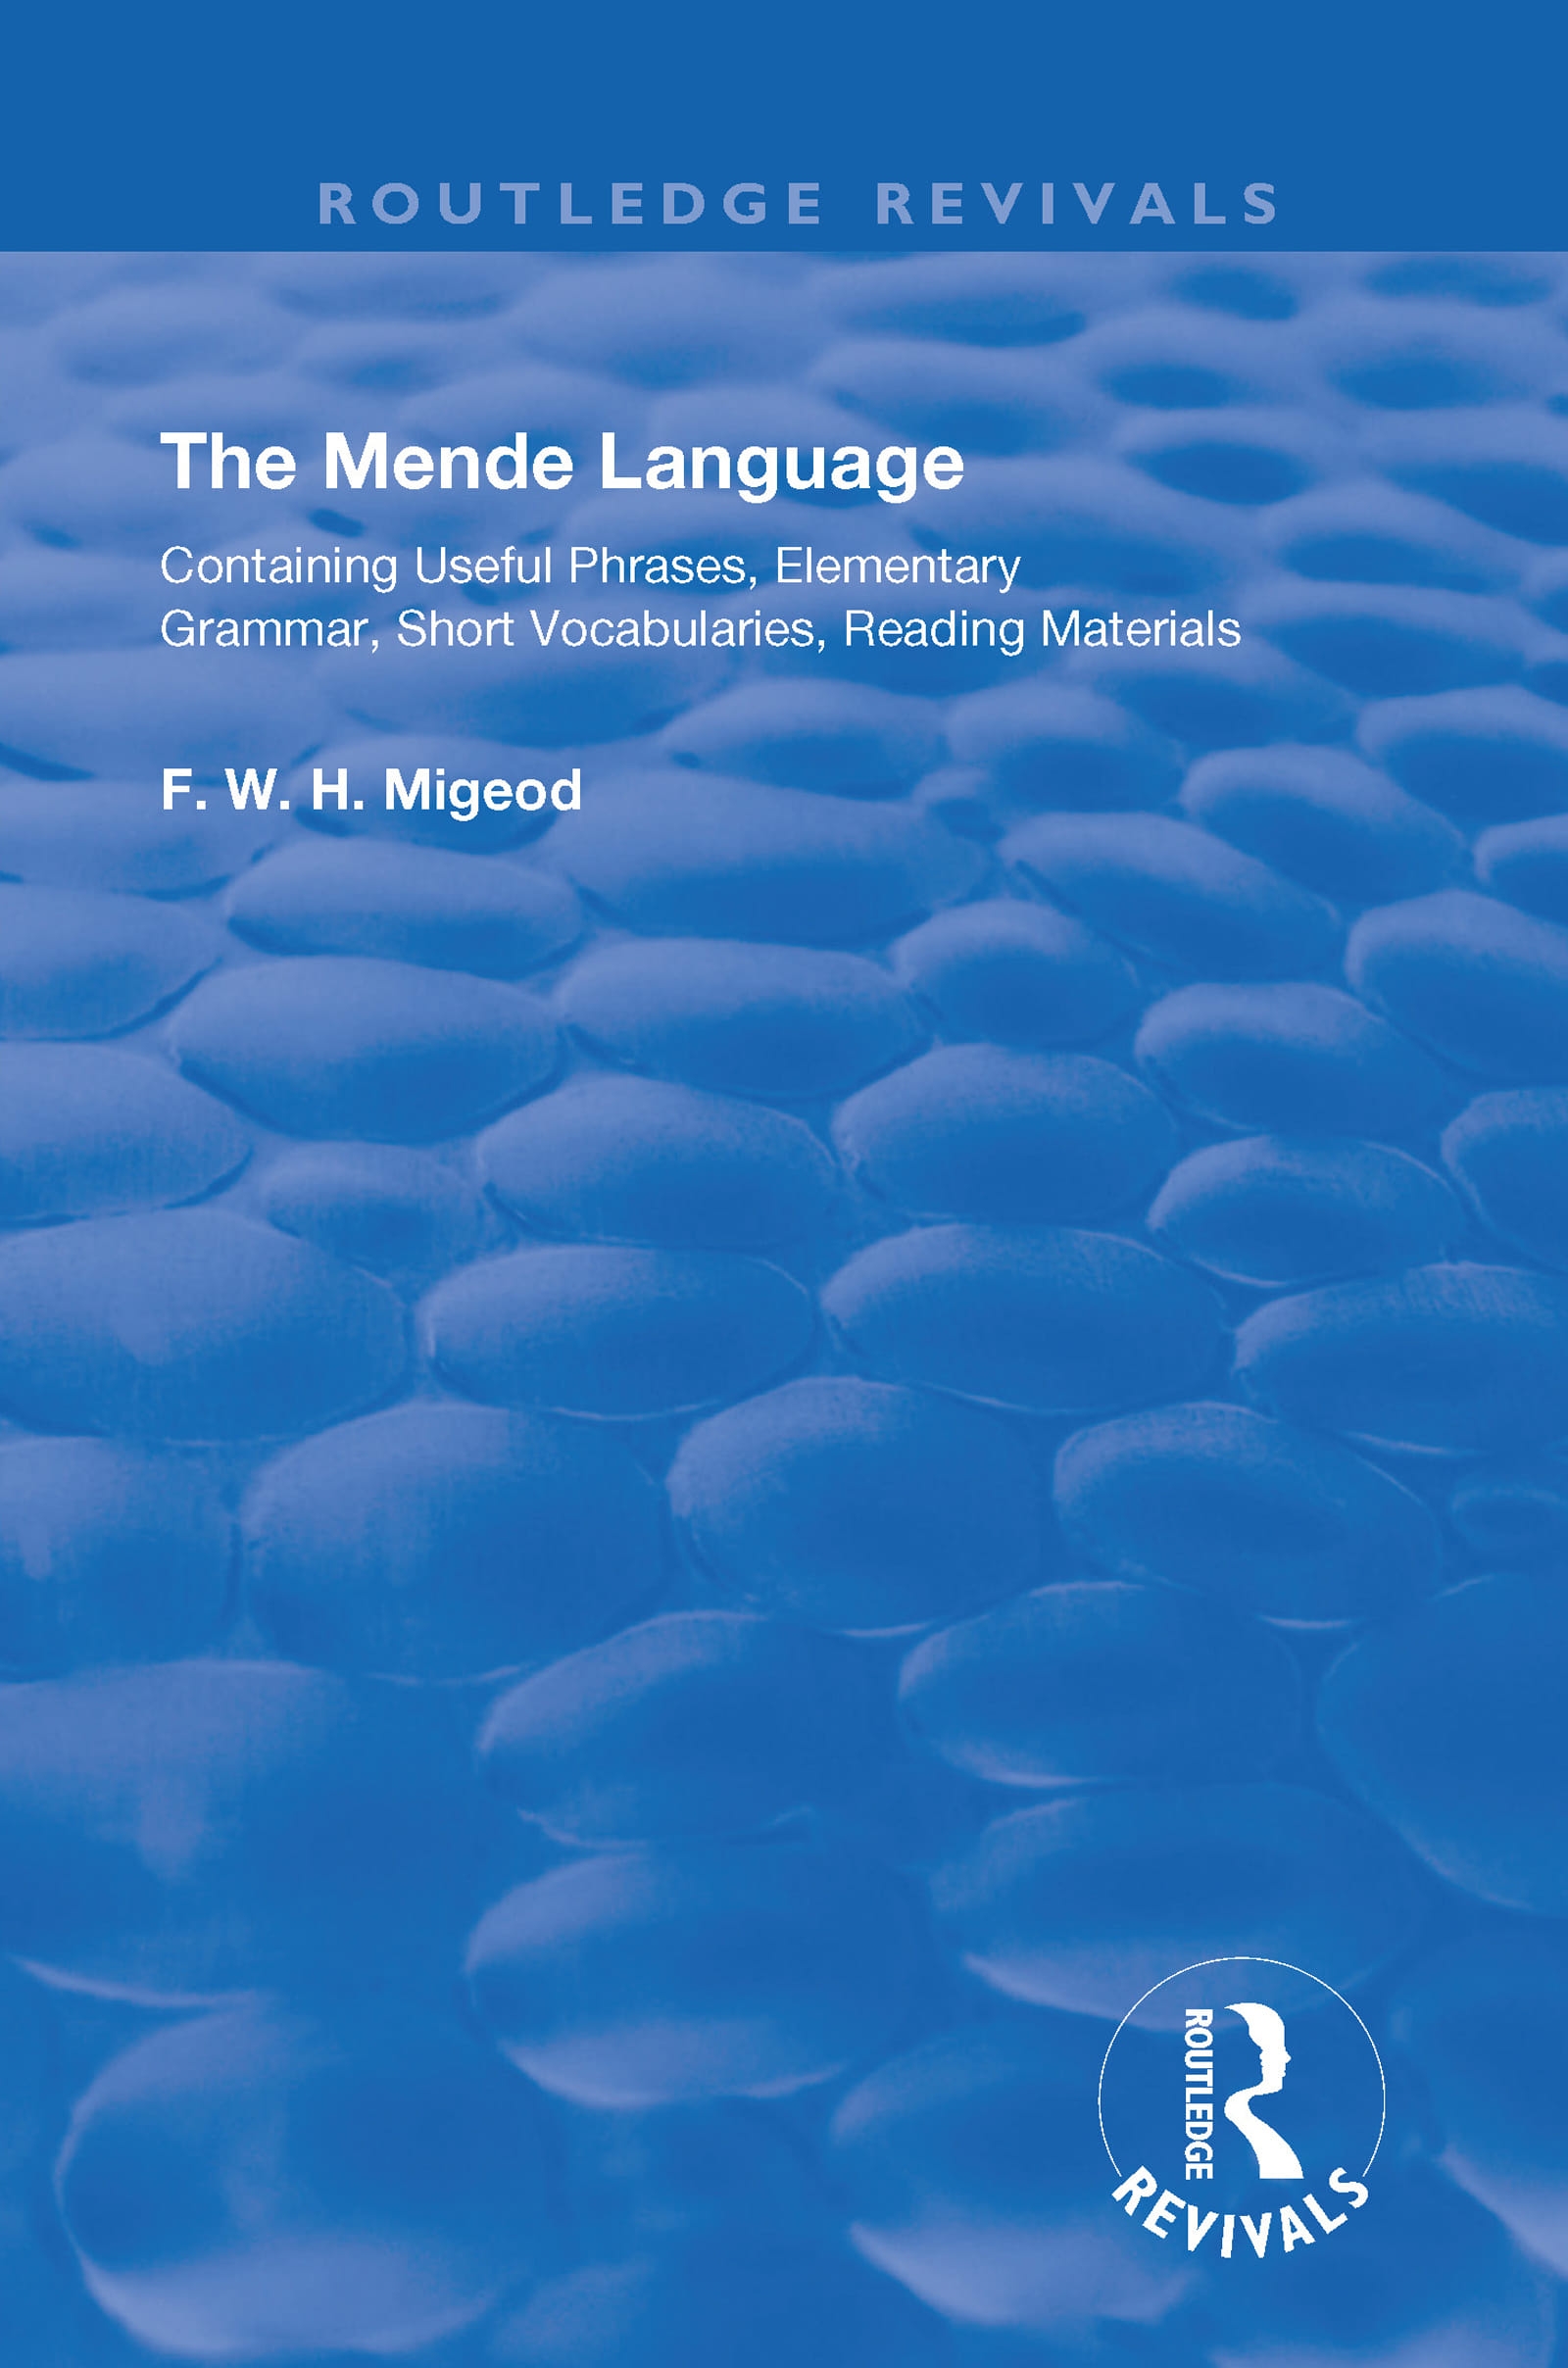 The Mende Language: Containing Useful Phrases, Elementary Grammar, Short Vocabularies, Reading Materials